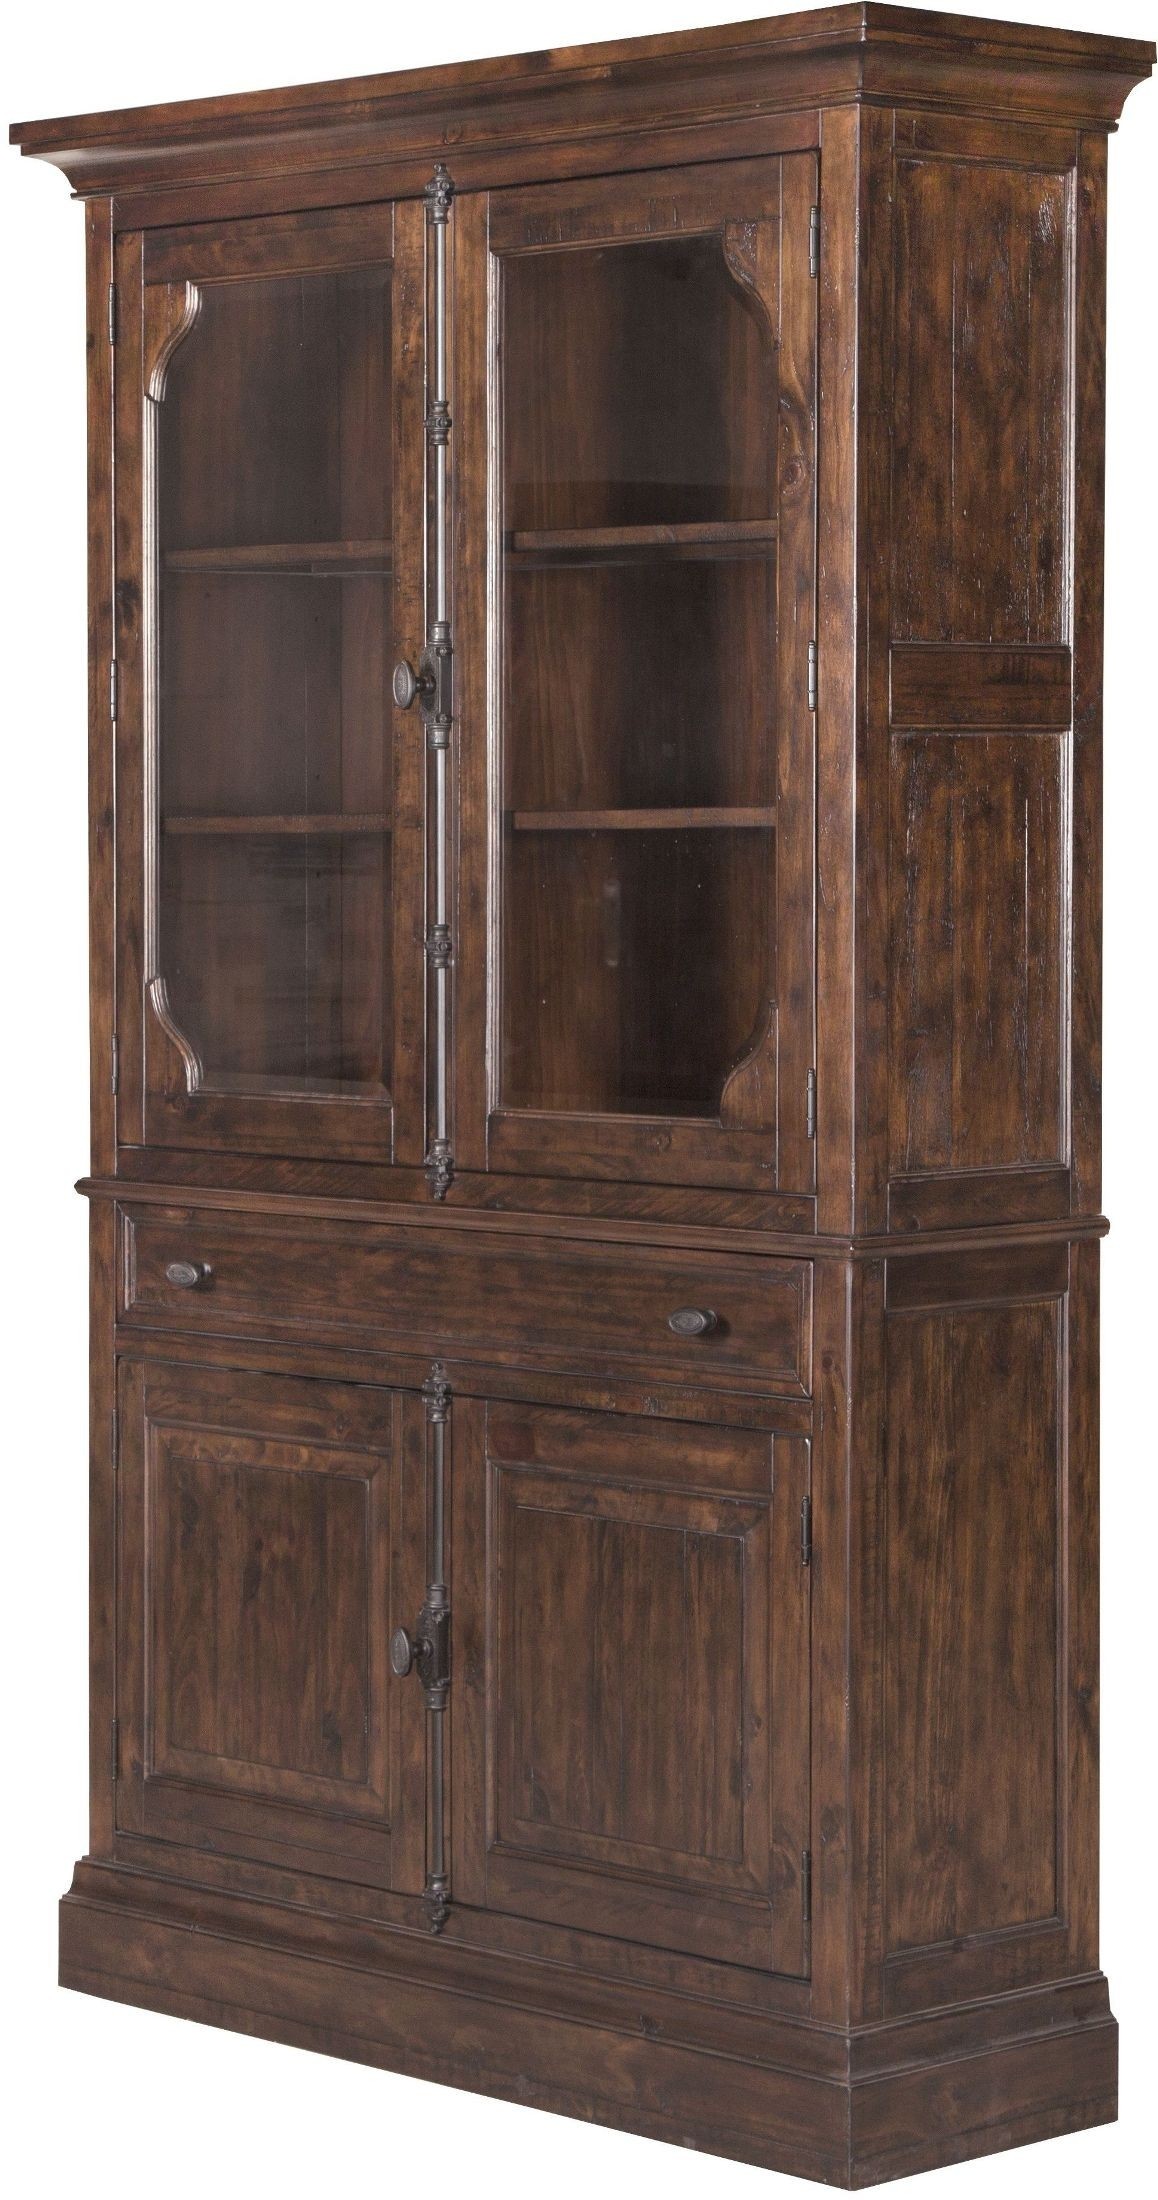 St claire rustic pine curio china cabinet from magnussen